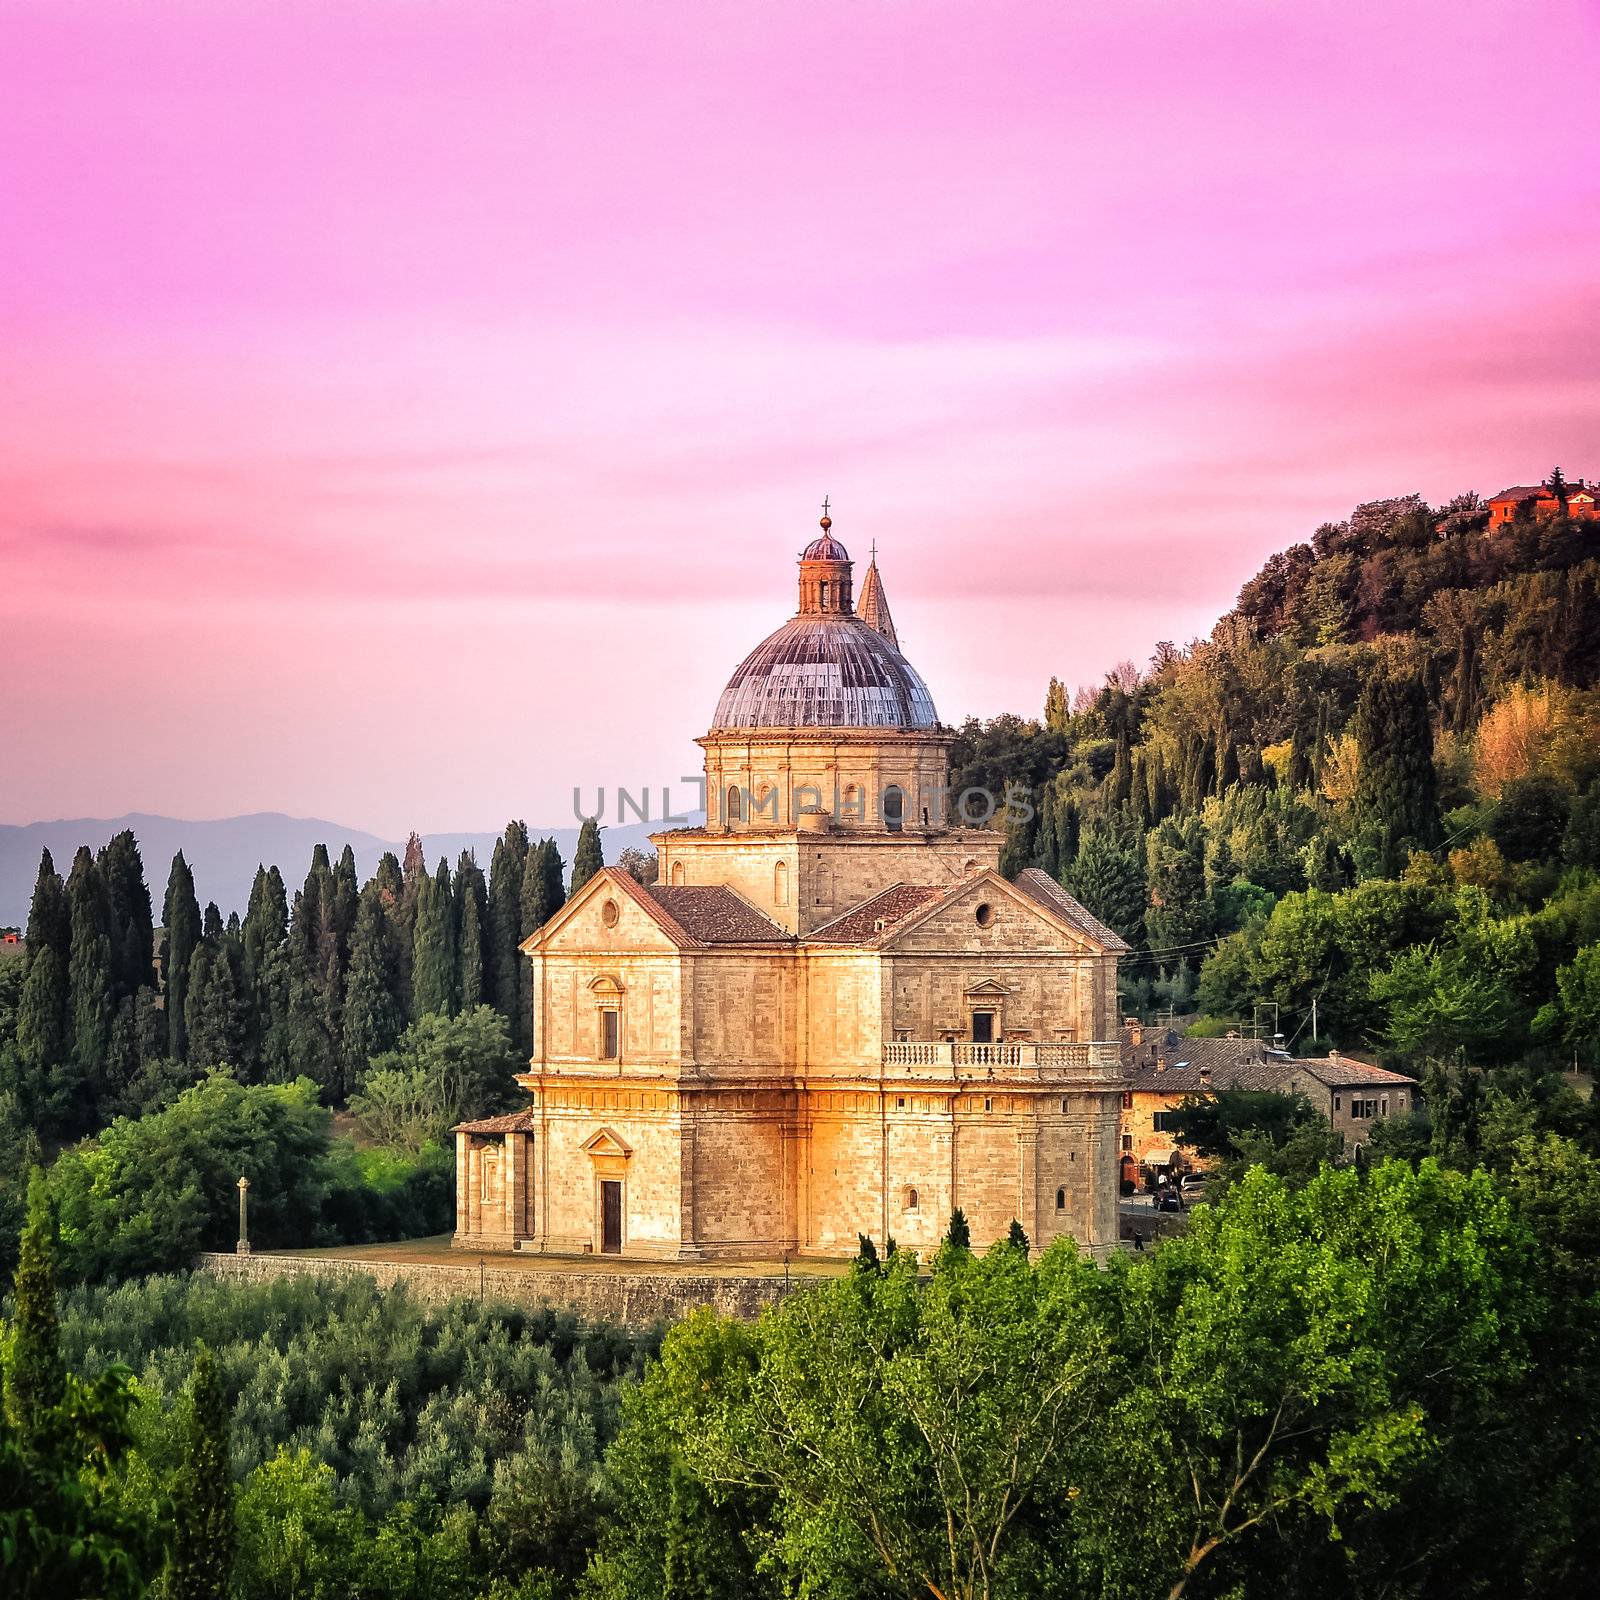 San Biagio cathedral at colorful sunset, square format, Montepulciano, Italy